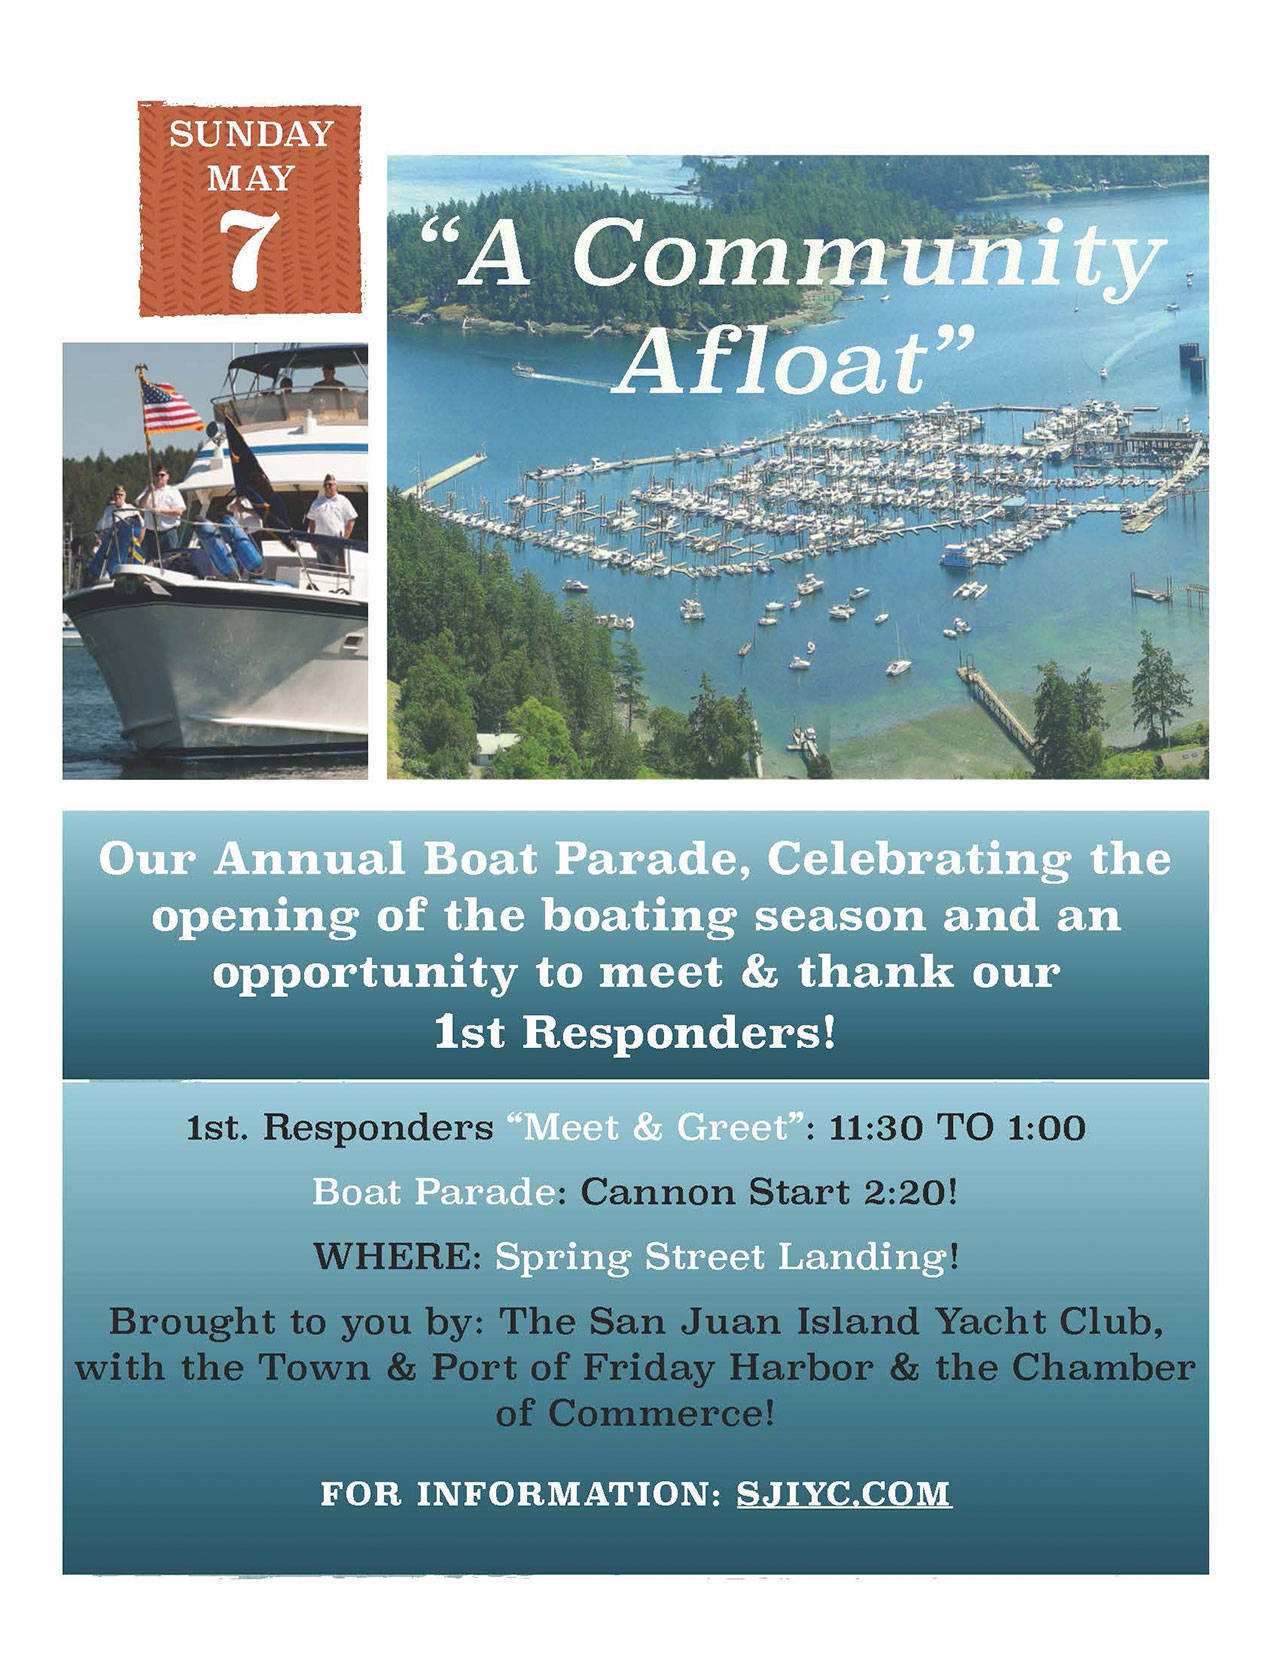 Friday Harbor Opening Day Boat Parade offers first responder meet-and-greet